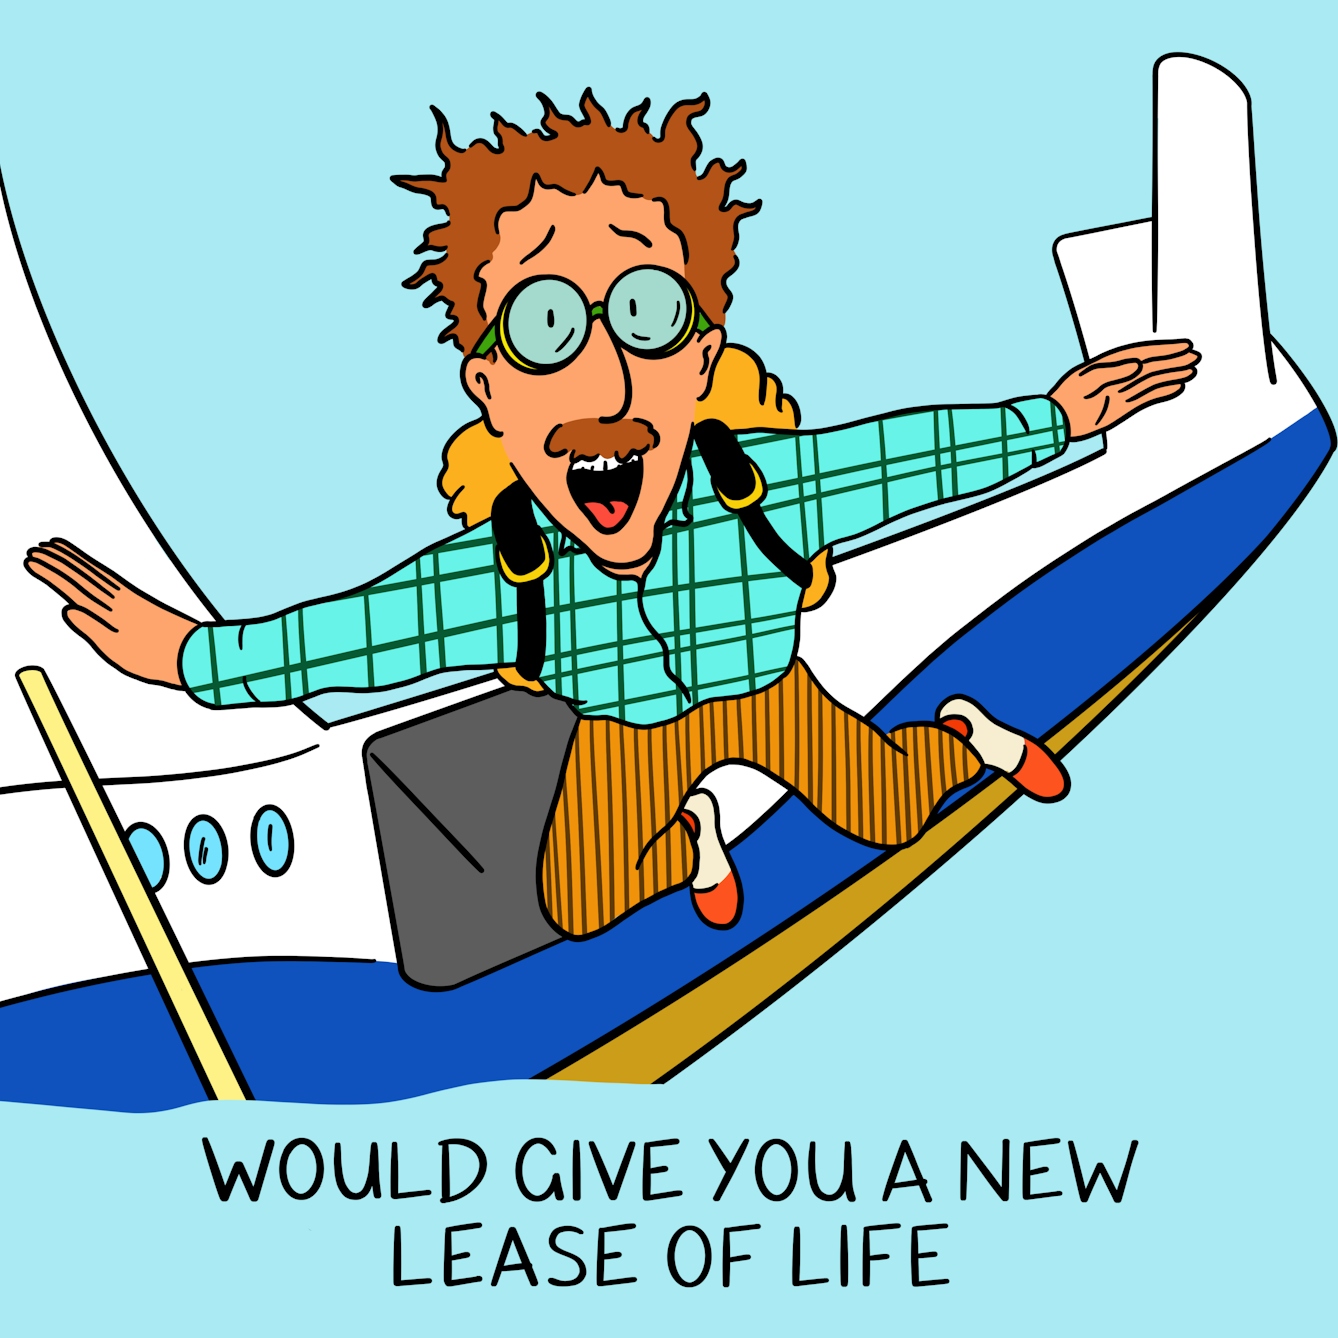 Panel 2 of a four-panel comic drawn digitally: a white man with a moustache, corduroy trousers and a plaid shirt leaps from an aeroplane with a parachute backpack, goggles and a terrified expression. The caption text reads "would give you a new lease of life..."